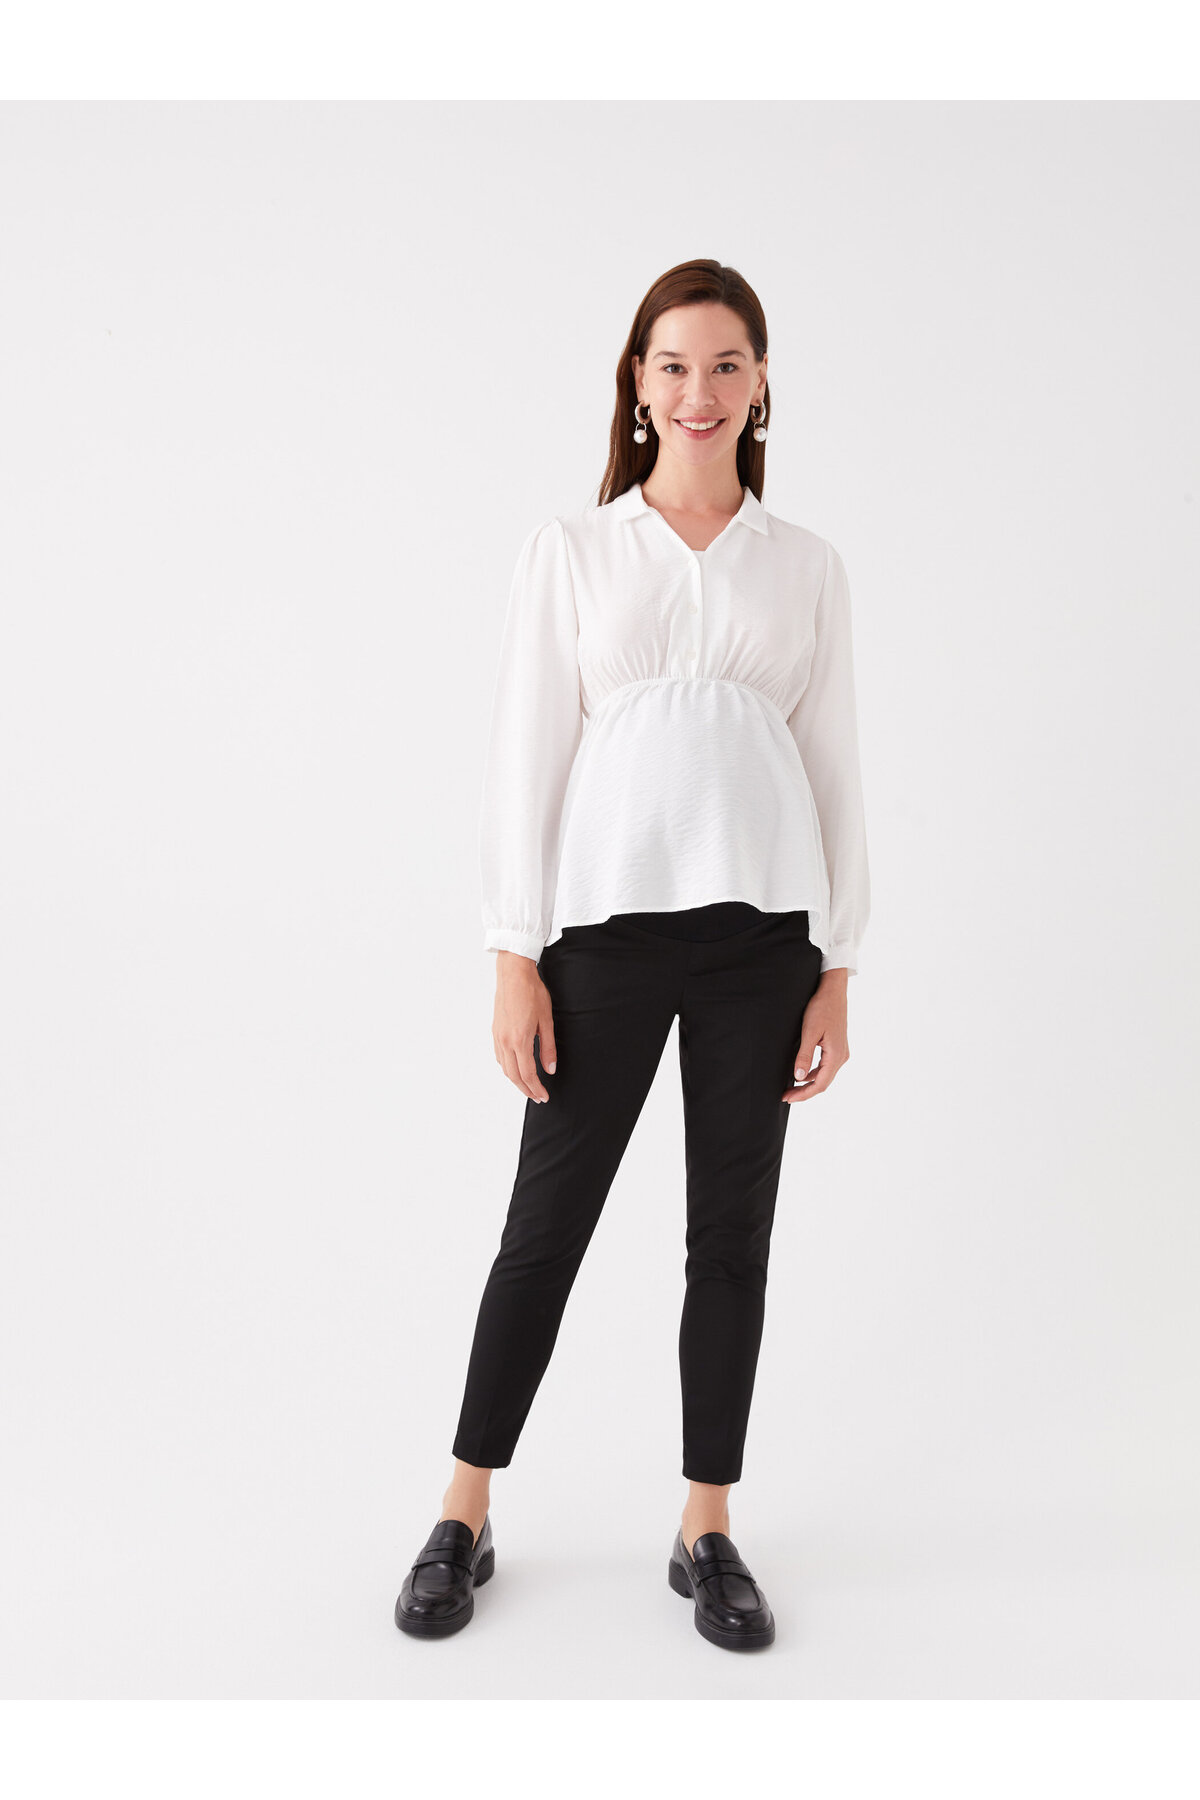 LC Waikiki Slim Fit Maternity Trousers with Abdominal Panel